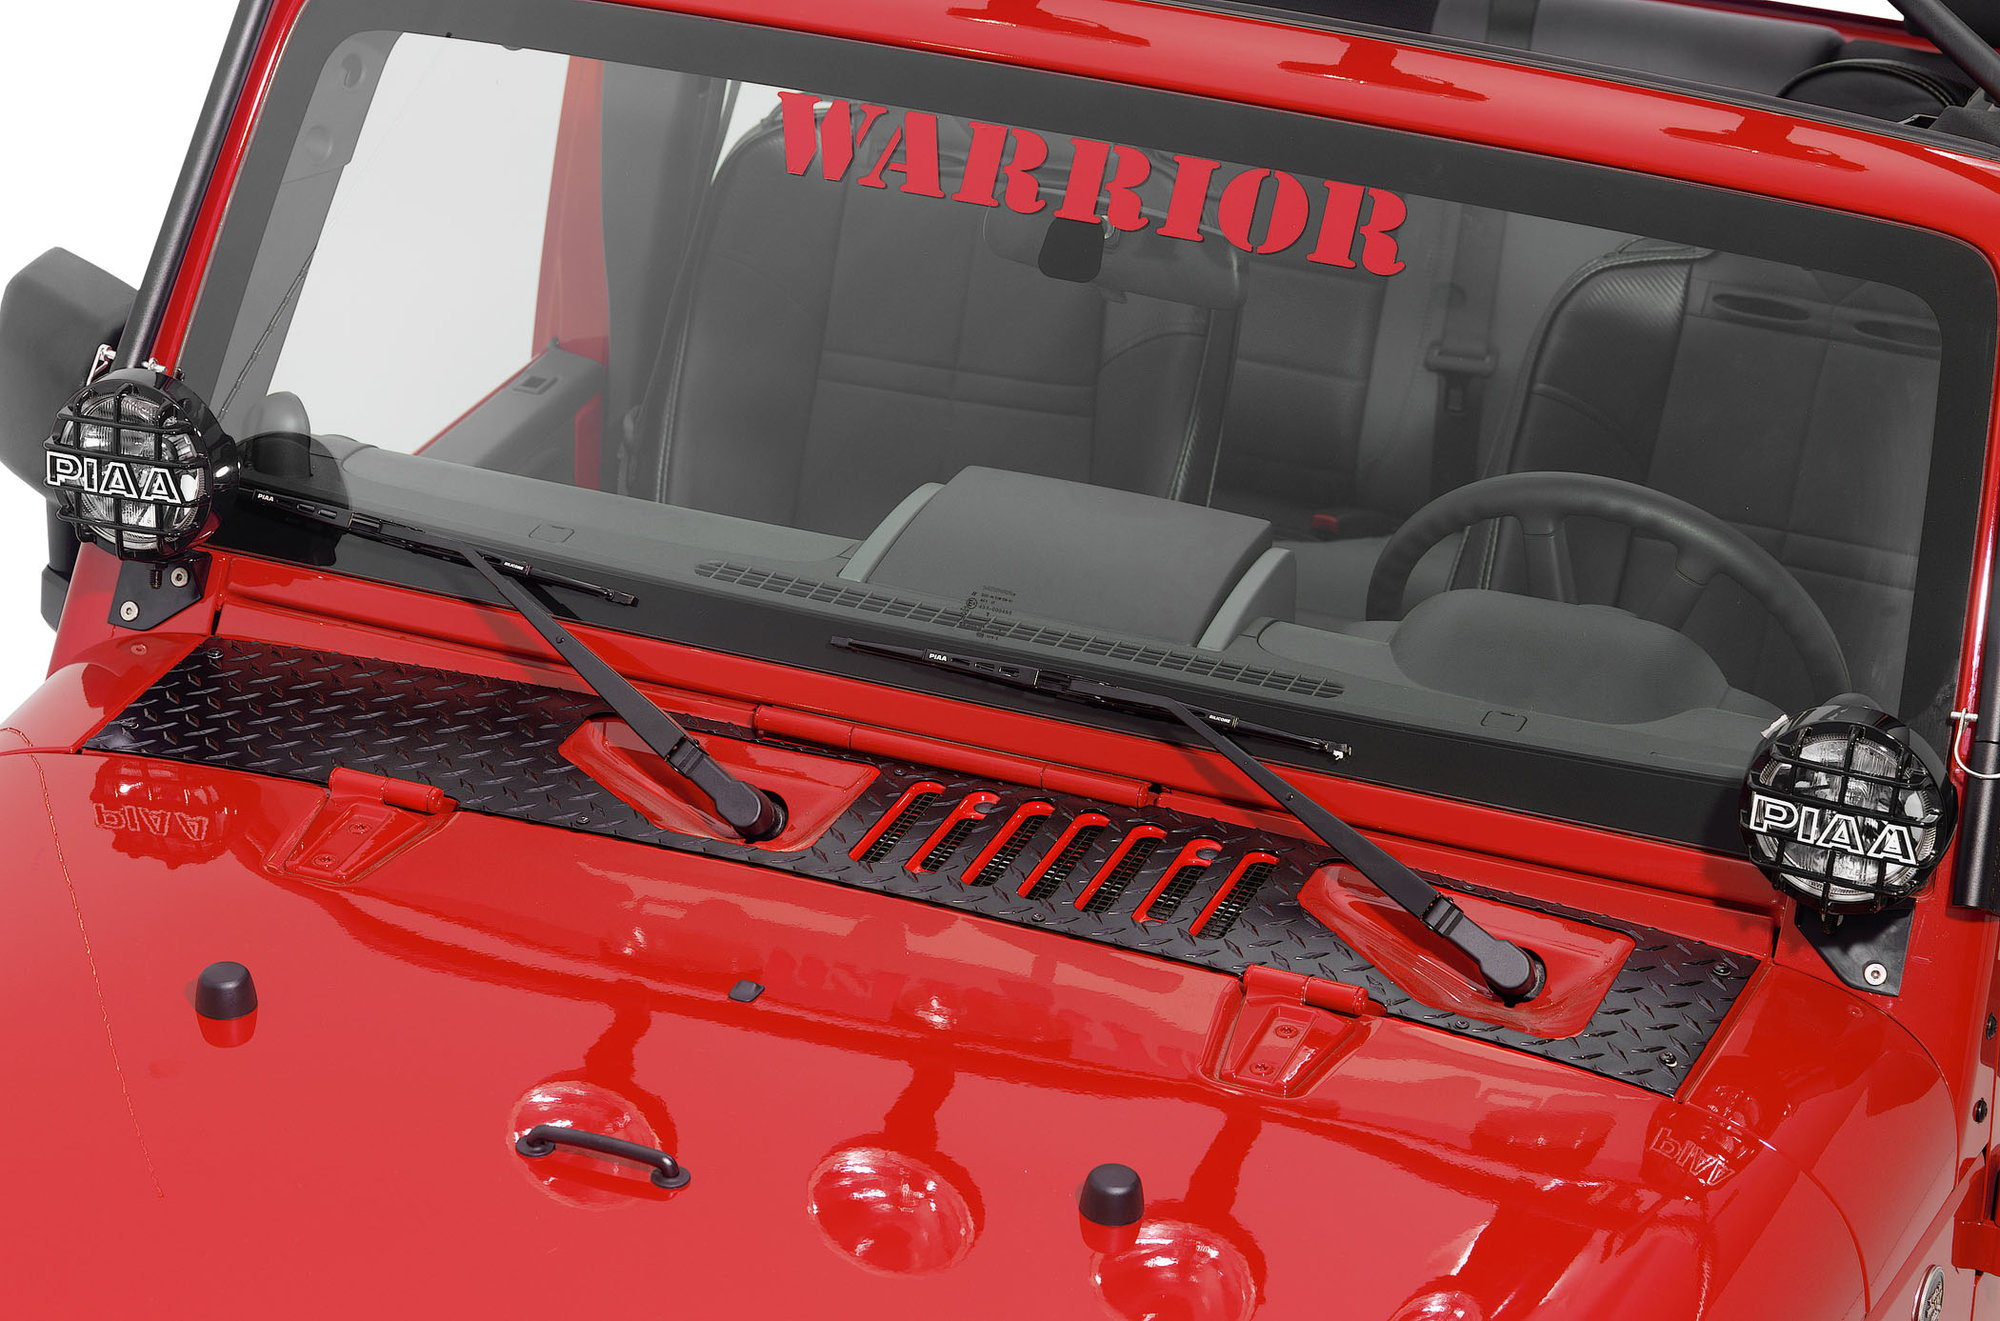 Warrior Products Cowling Cover for 0718 Jeep Wrangler JK Quadratec